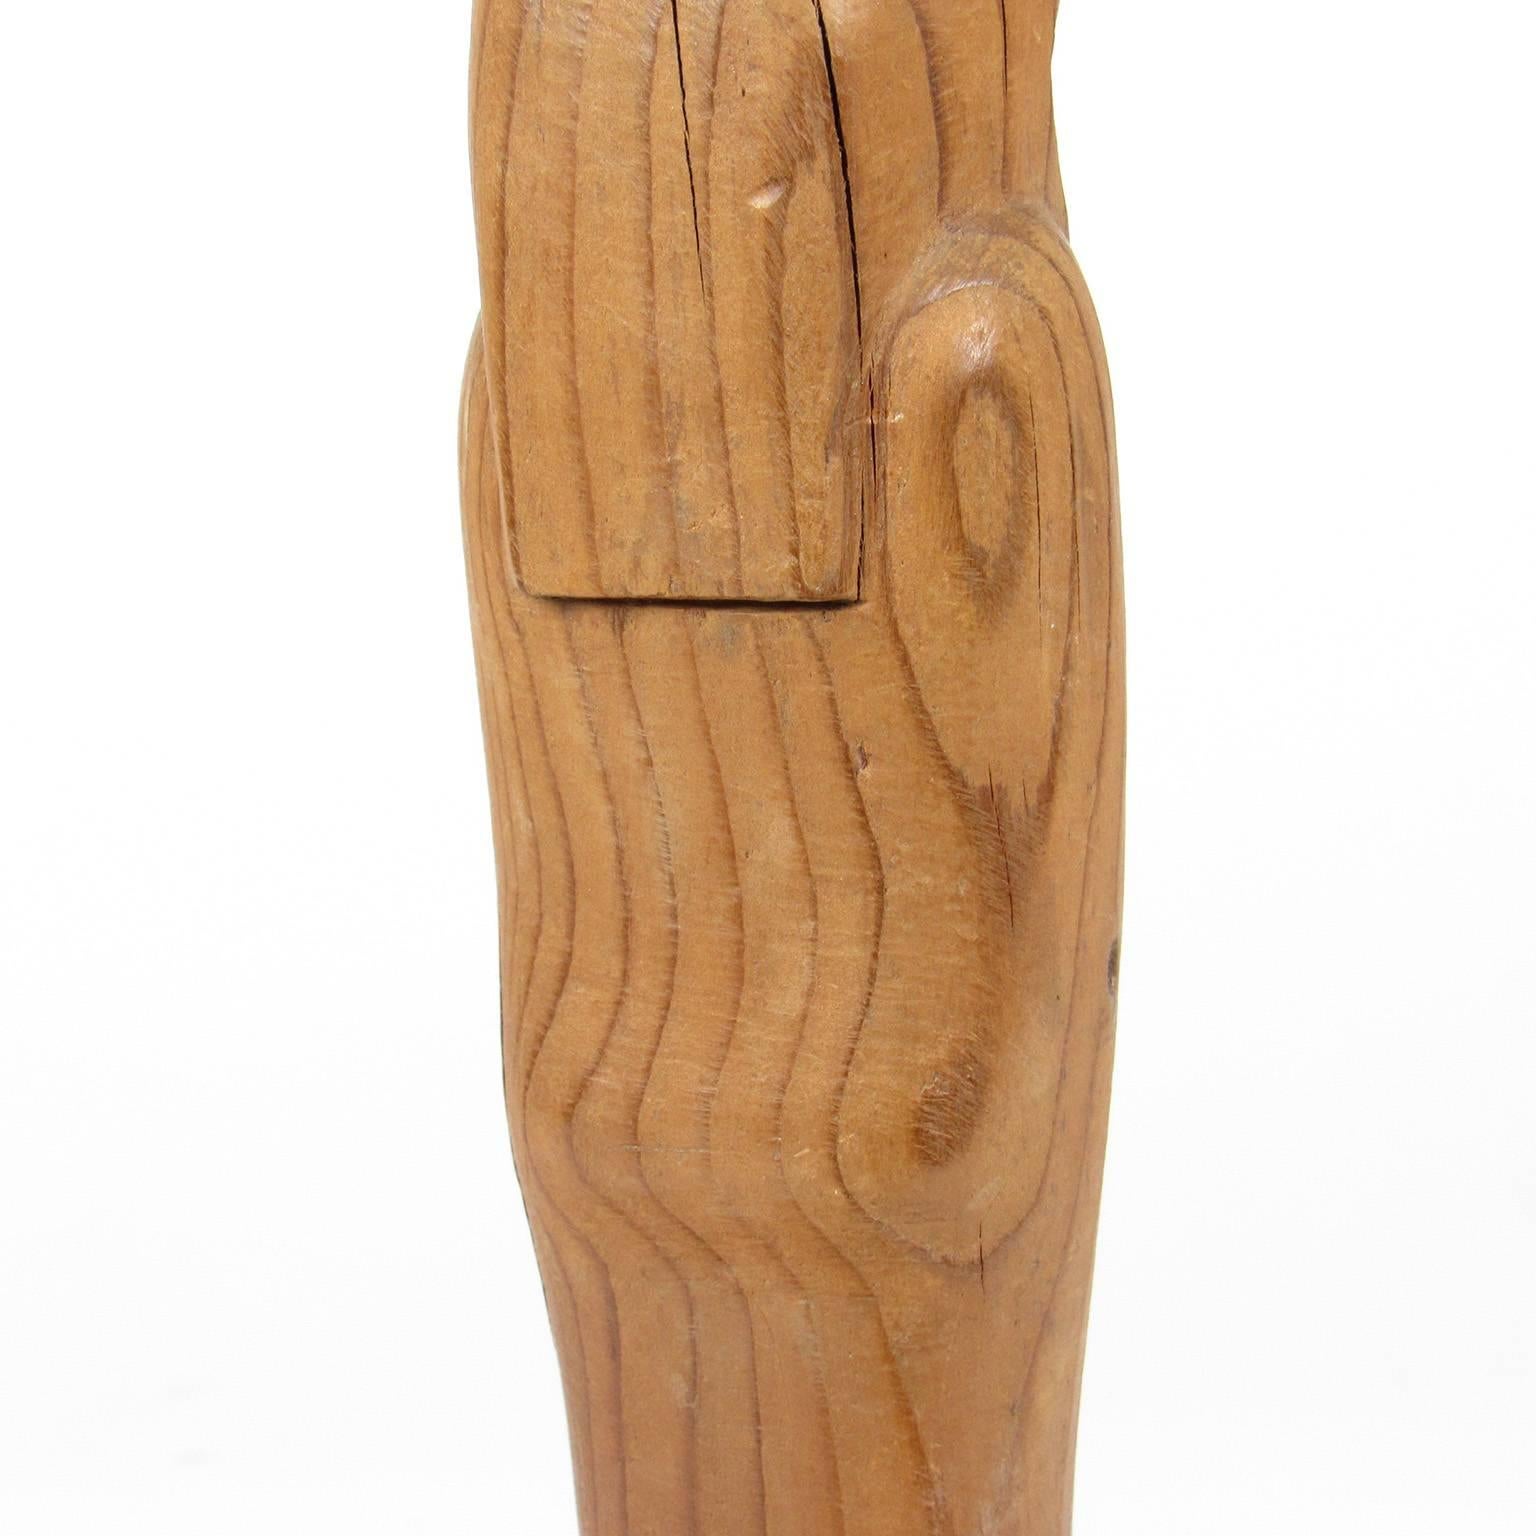 18th Century and Earlier Ancient Egyptian Carved Wood Ushabti Figure